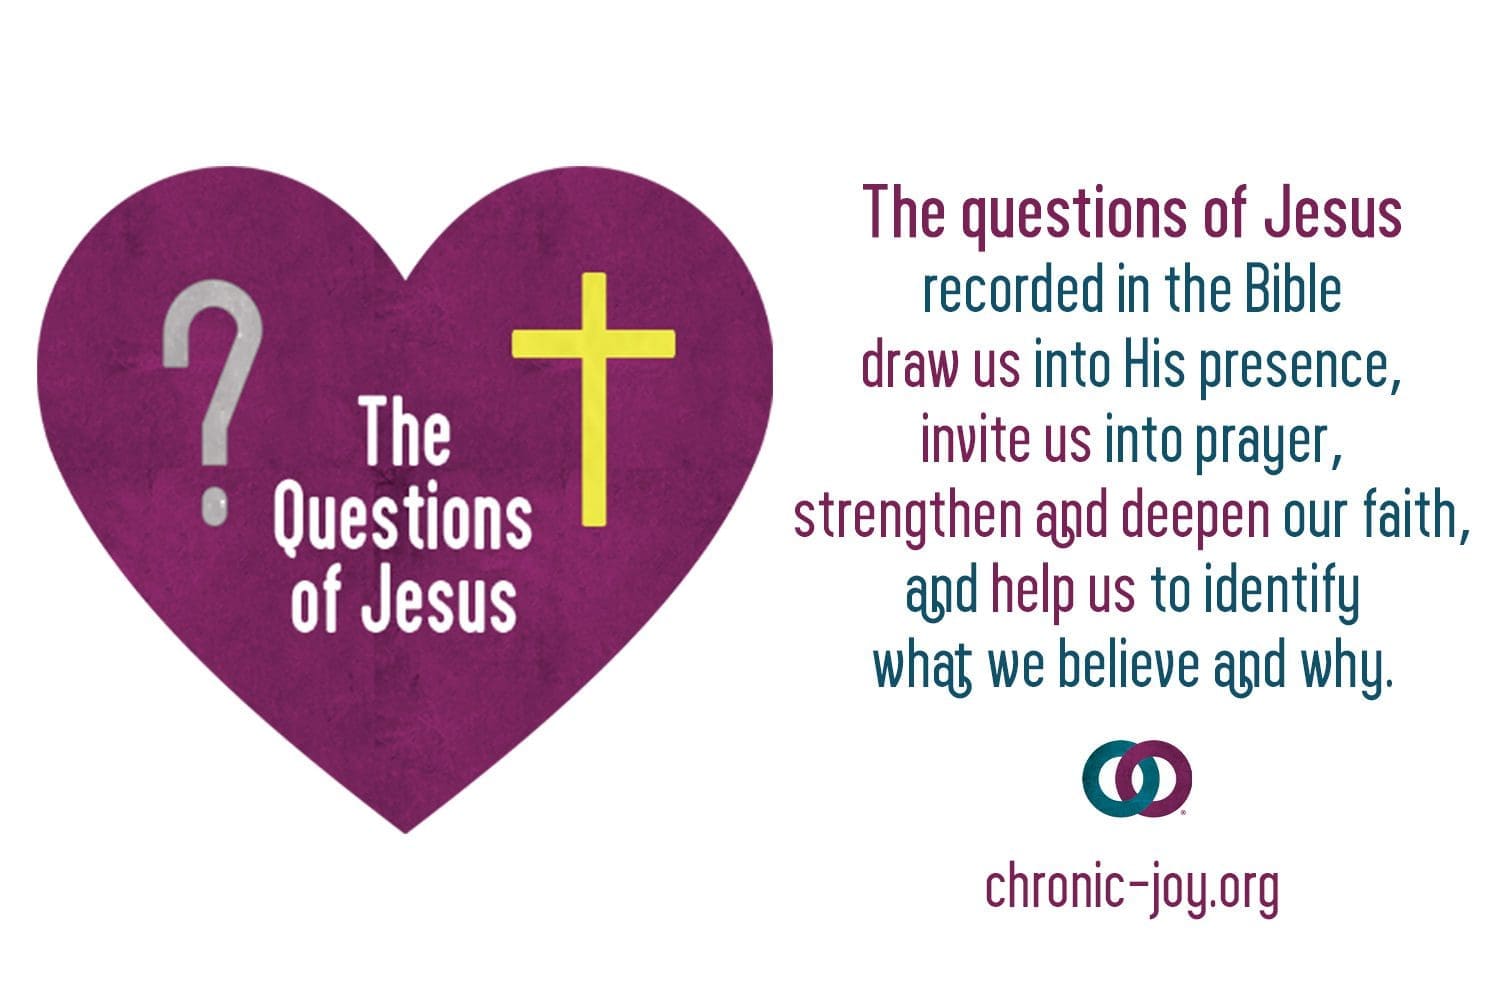 The Questions of Jesus